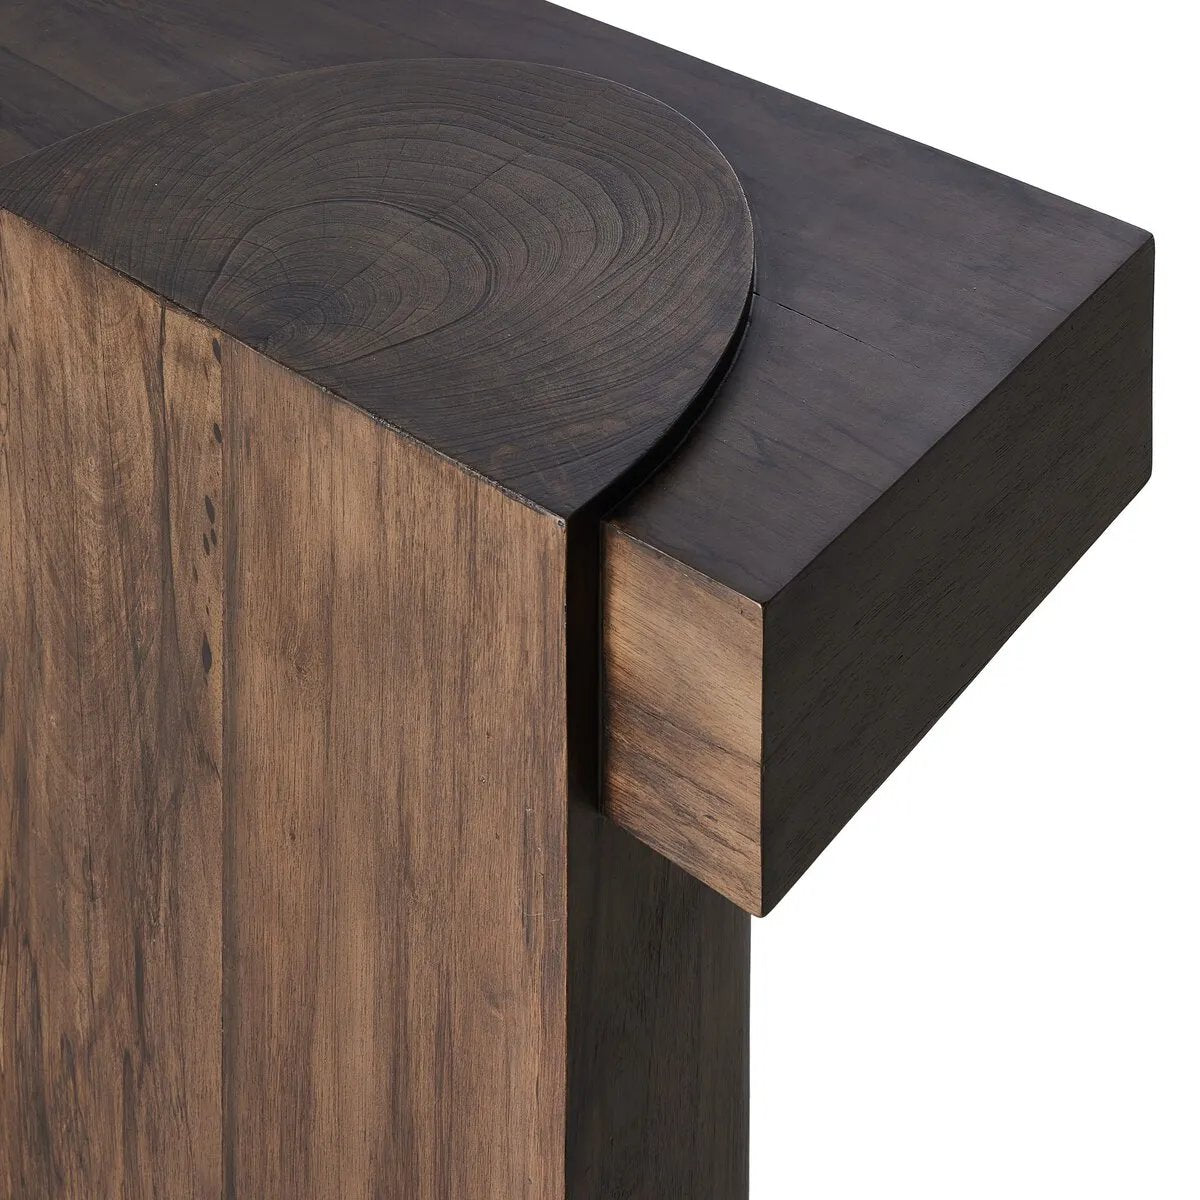 Made from thick-cut oak with a deep, dark brown finish, an asymmetric base features pillar-style legs, with an oyster-cut detail on the top of each leg. The result: a show-stopping silhouette. This item has limited online distribution and may not be sold on websites without prior approval. Visit the FAQ page in our Help Center for more details. Amethyst Home provides interior design, new home construction design consulting, vintage area rugs, and lighting in the Nashville metro area.